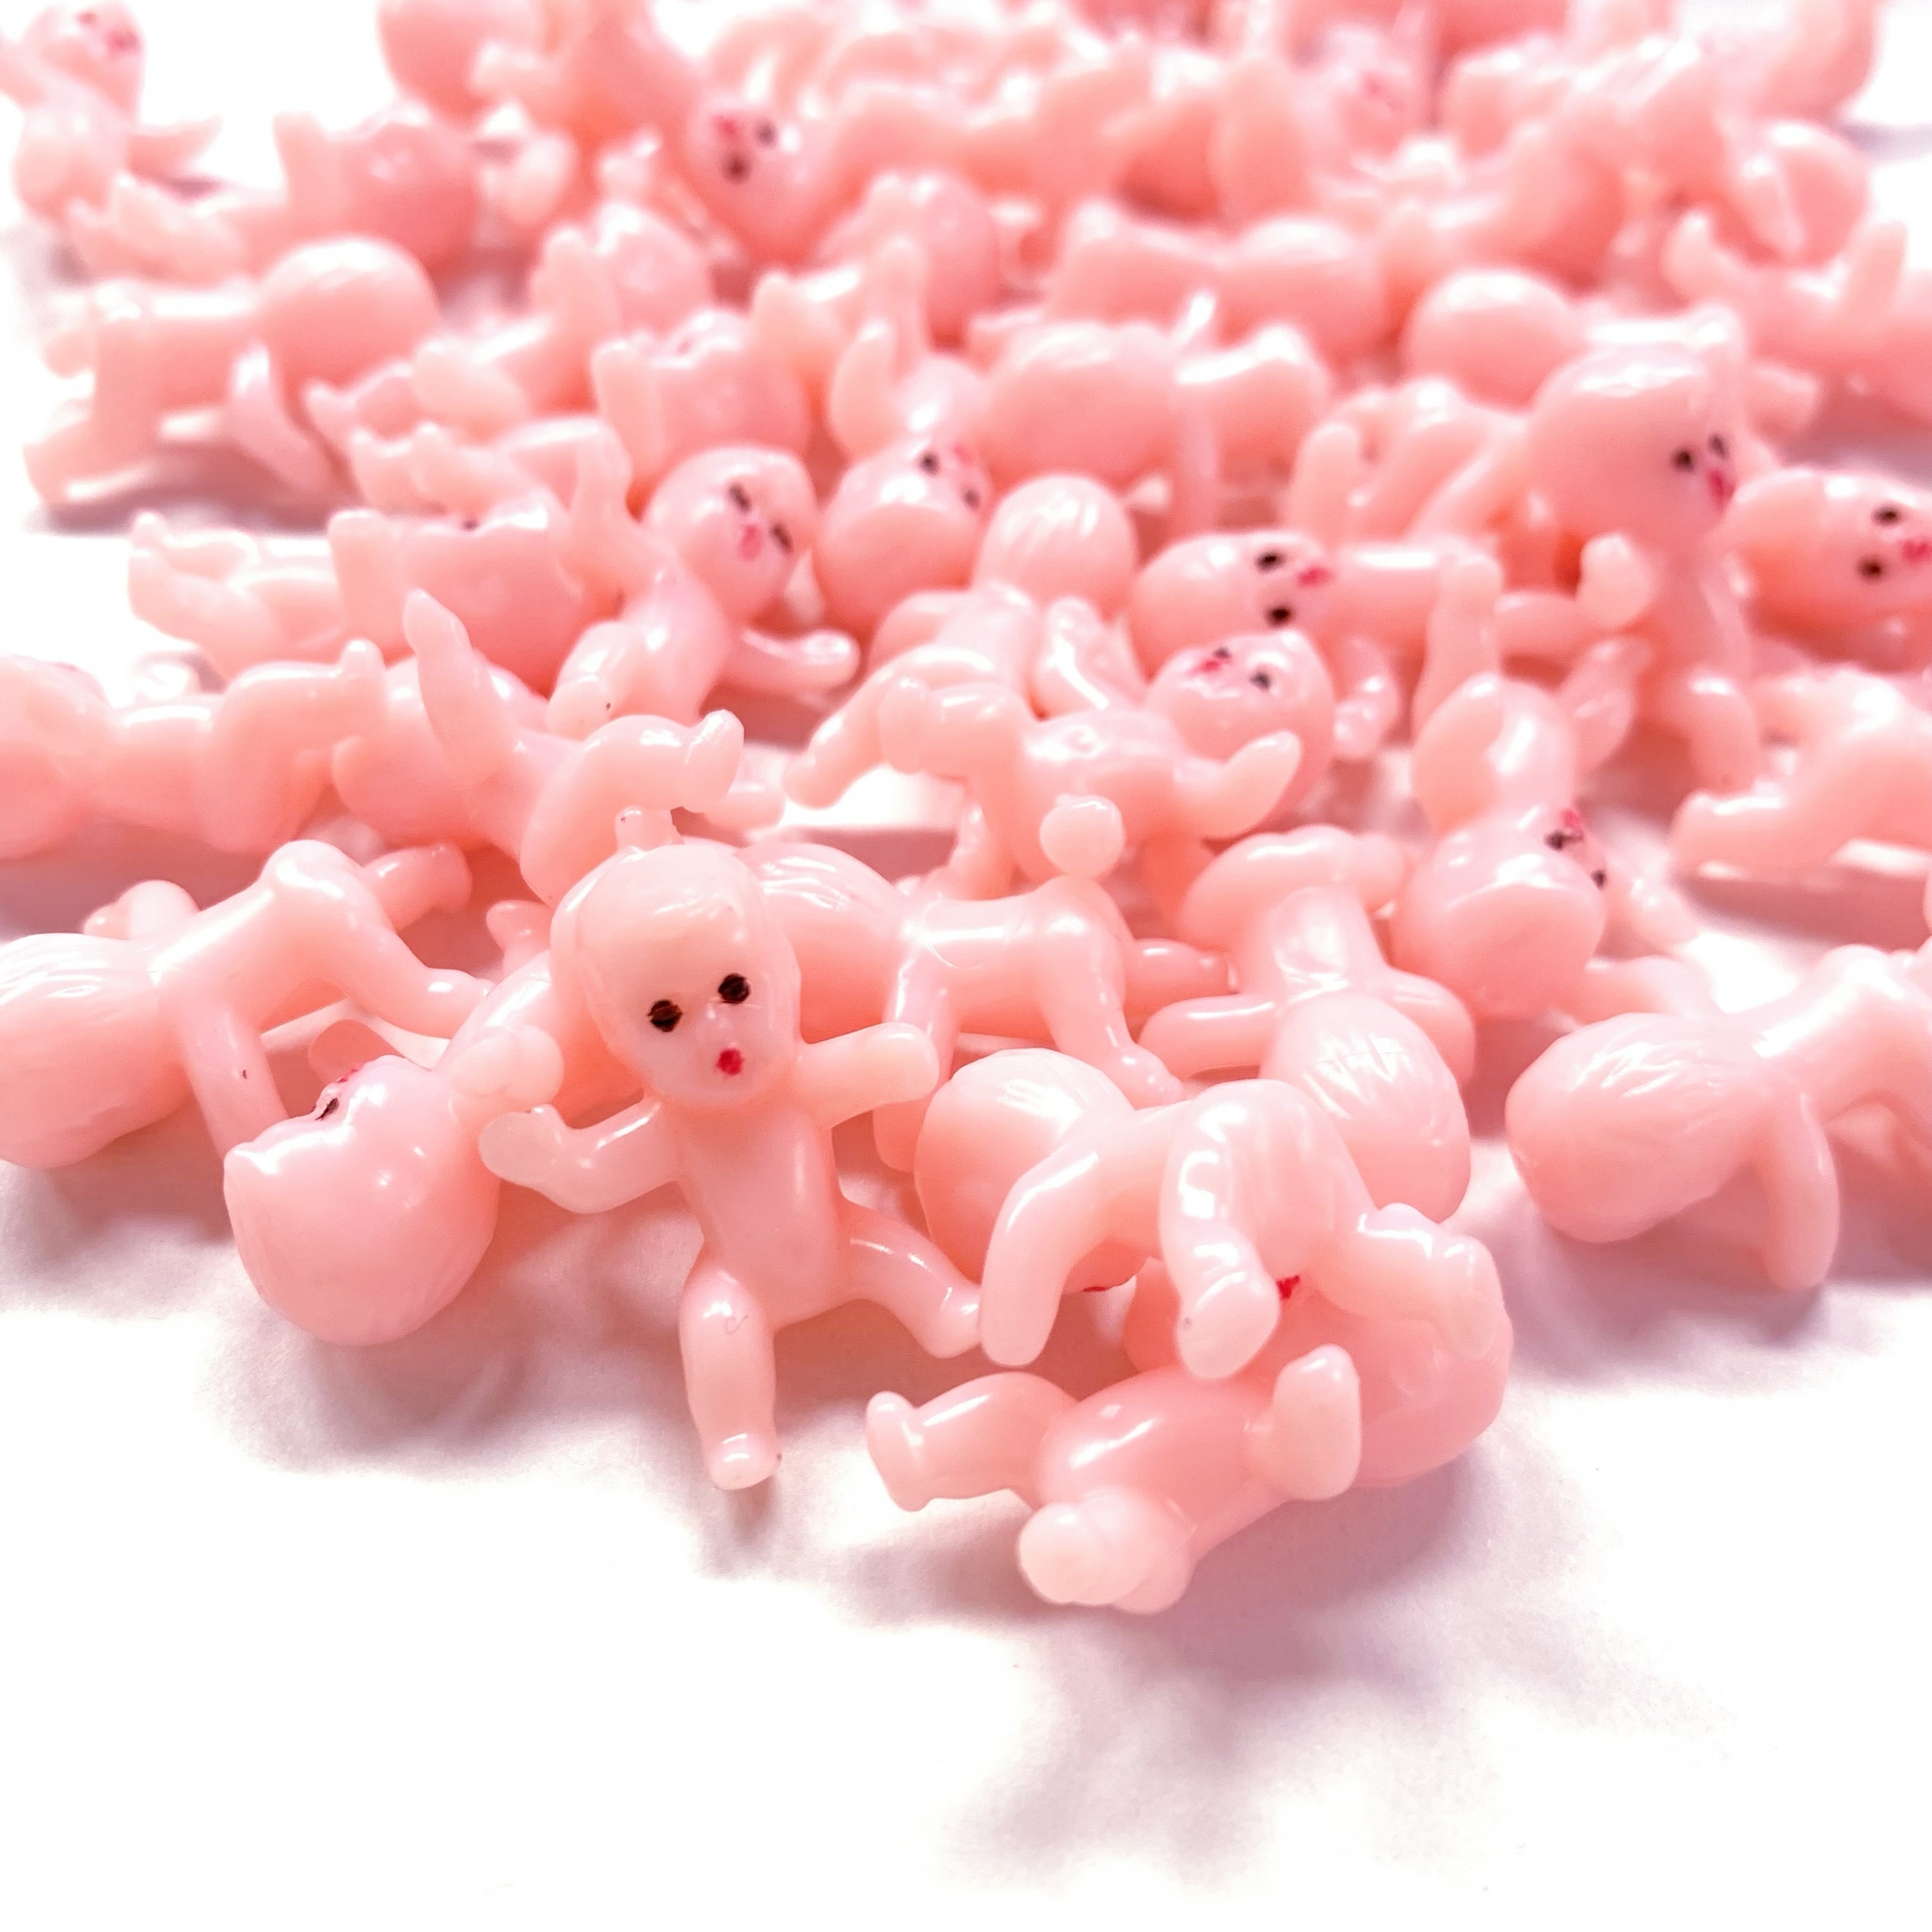 Zalmoxe Mini Plastic Babies 300 Pcs, Tiny Baby Figurines Small King Cake  Babies Bulk for Baby Shower Ice Cube Game Party Favors Decorations Crafting  1